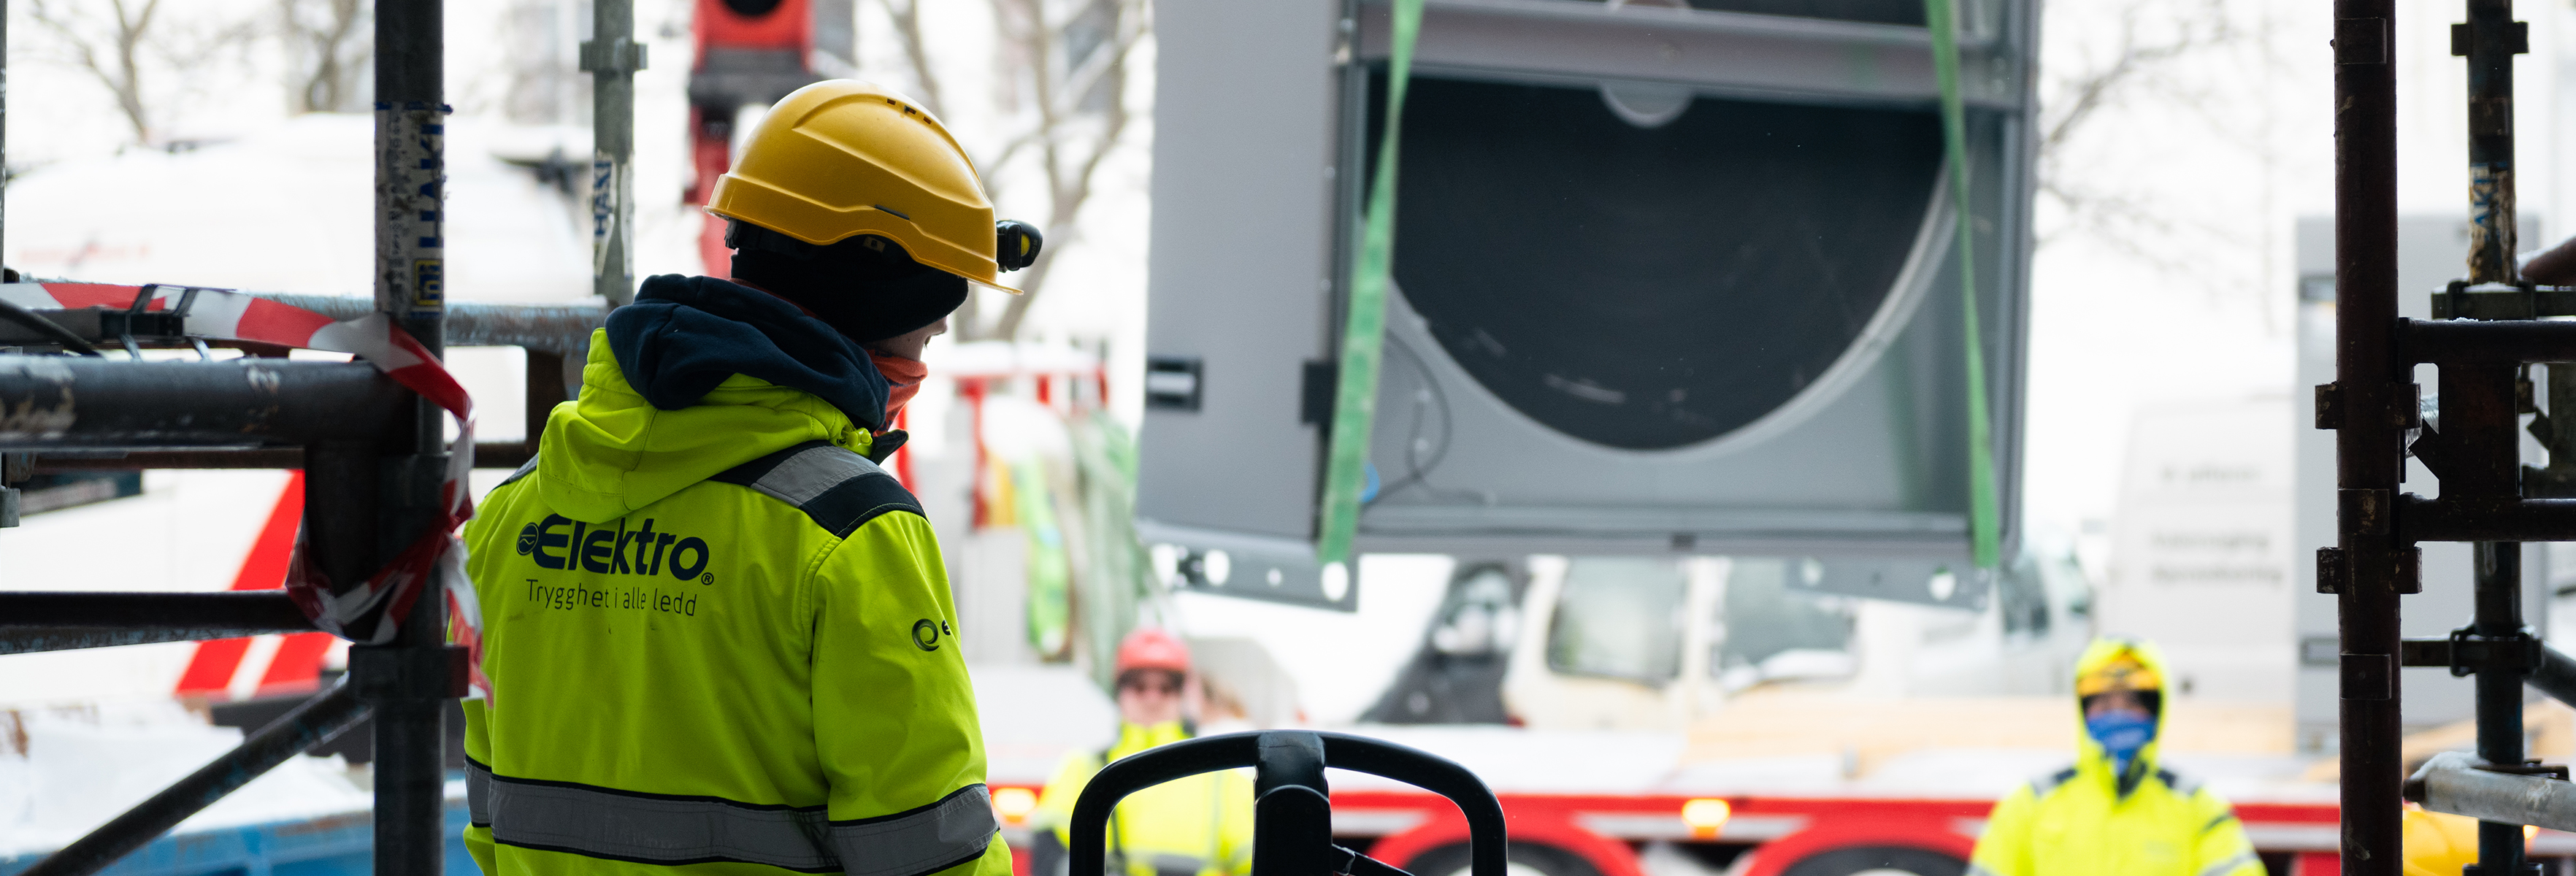 Man with a hardhat and a yellow coat with Elektrogruppen logo on the back on a buliding site